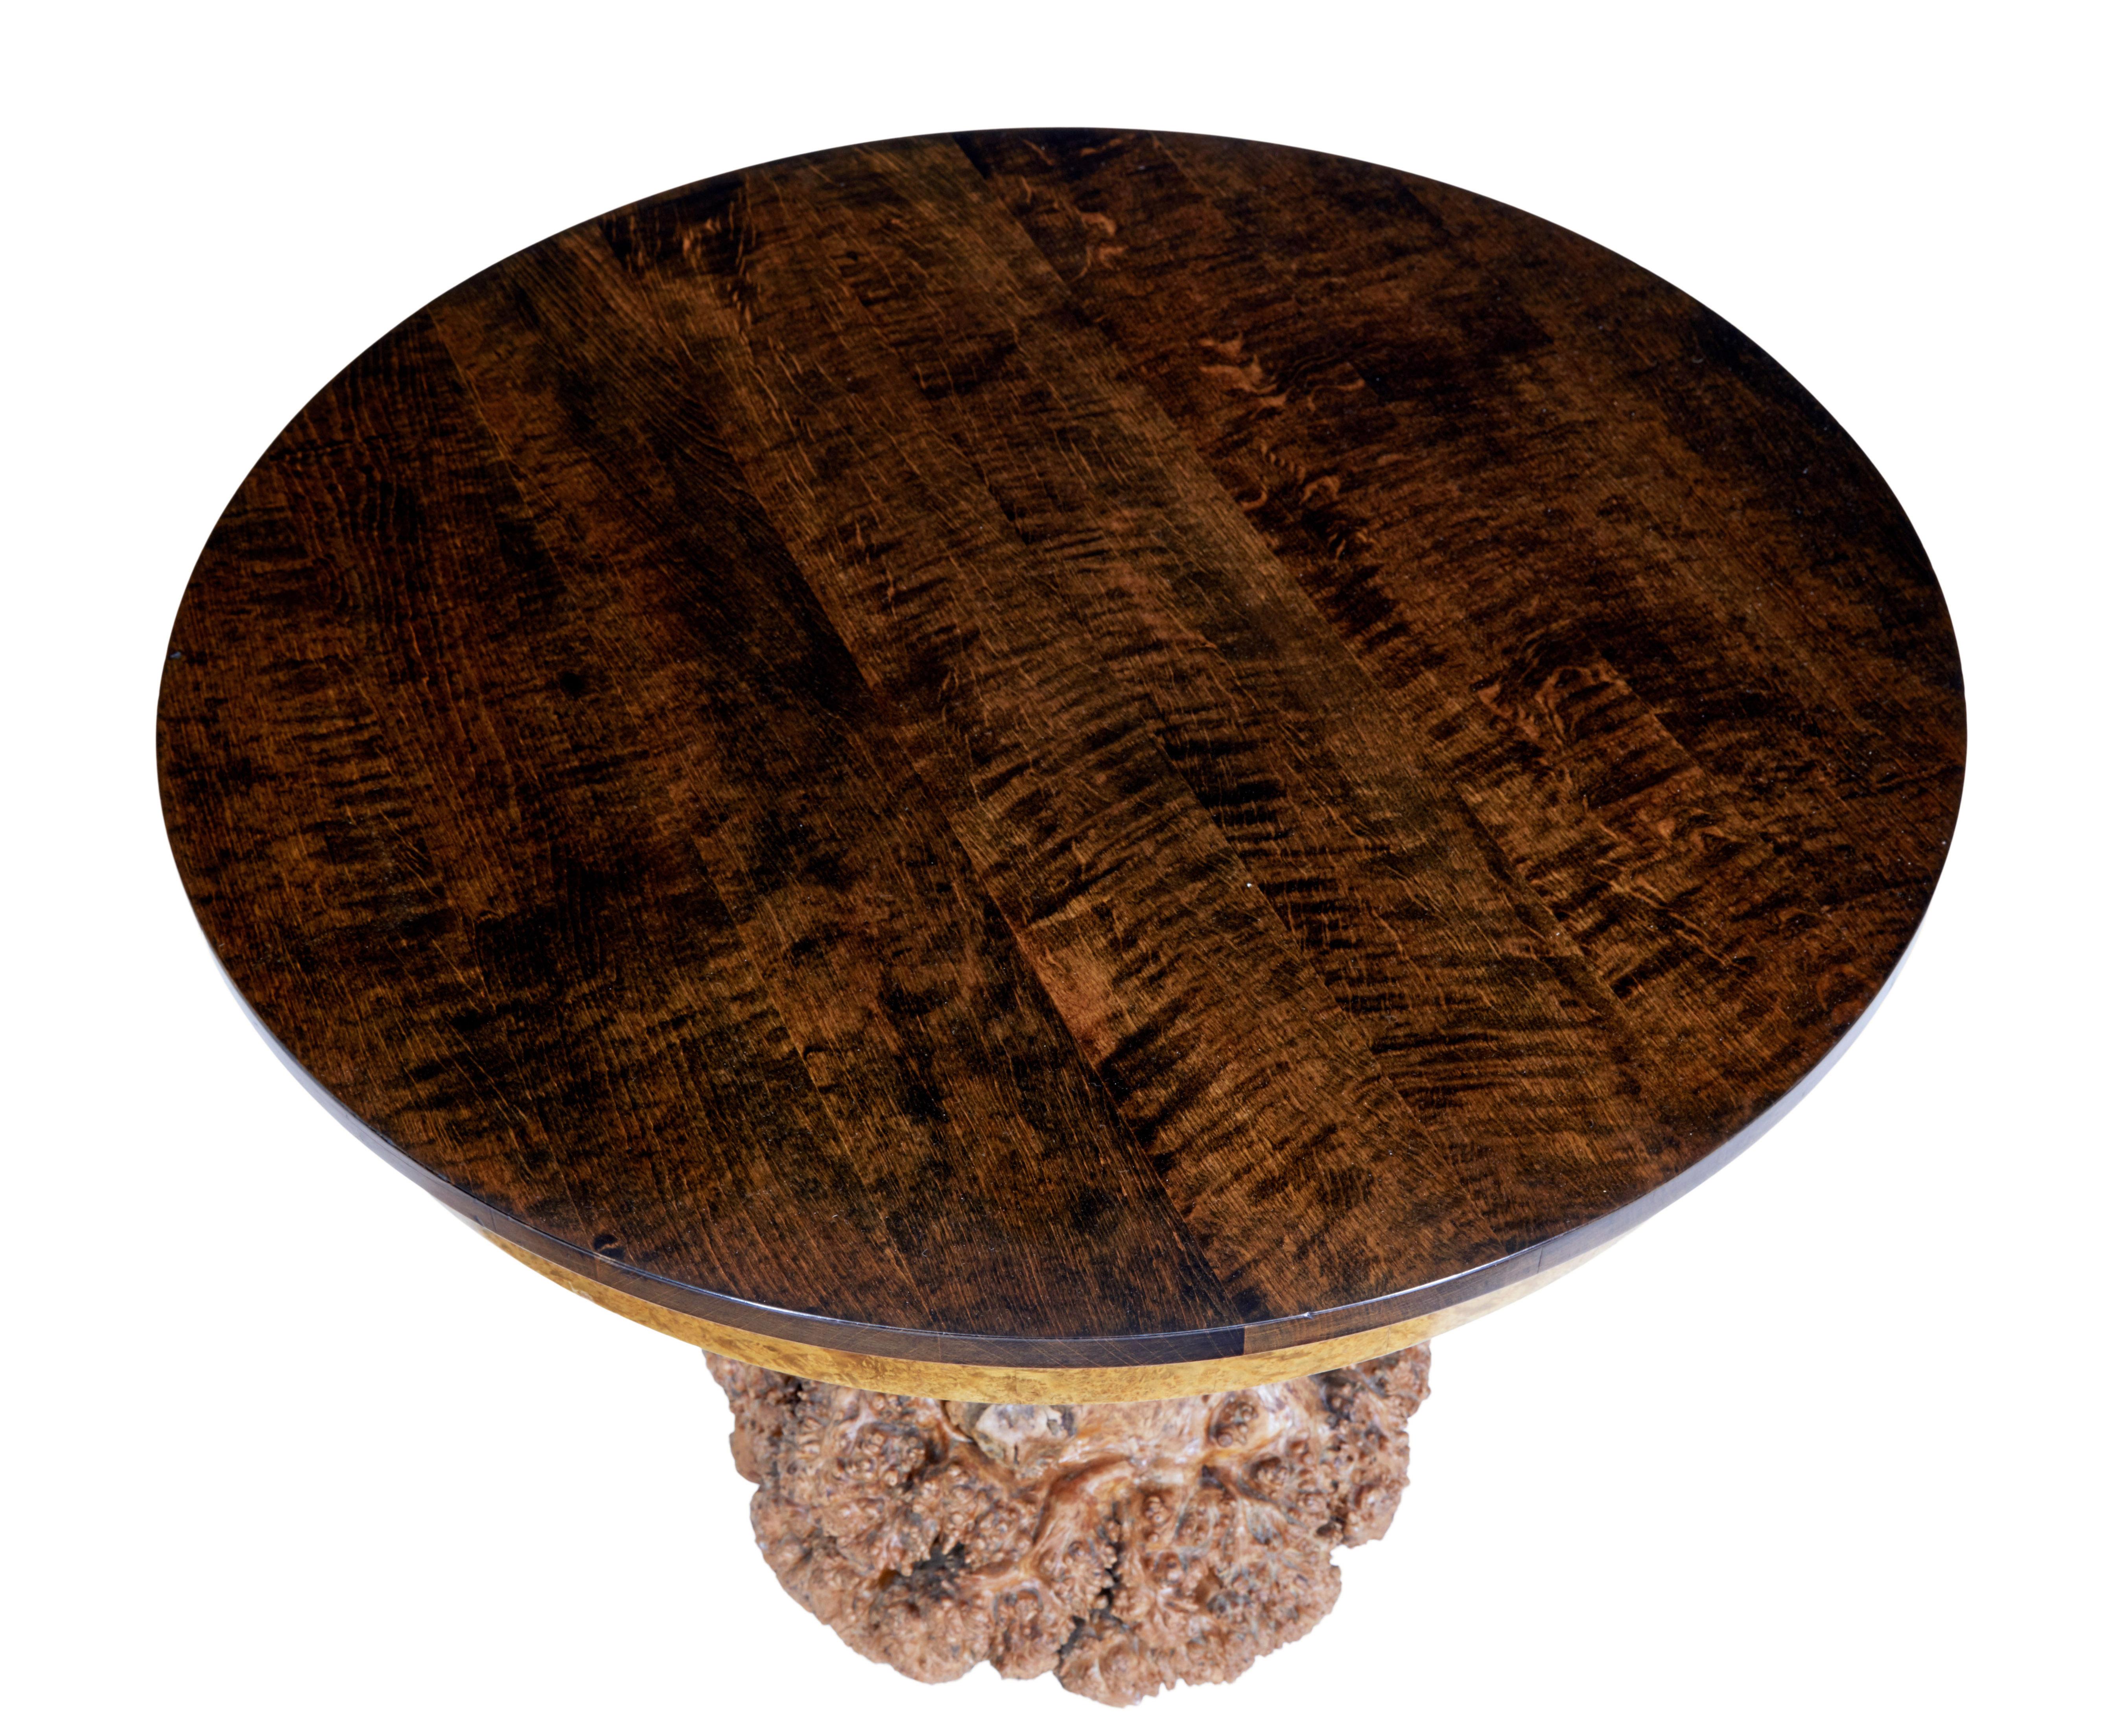 Unusual circular occasional table with burr root base, circa 1930.

Recently re-polished dark stained circular birch top with burr frieze, standing on burr root base which has been adapted to work as a base.

Rich golden colour.

Minor surface